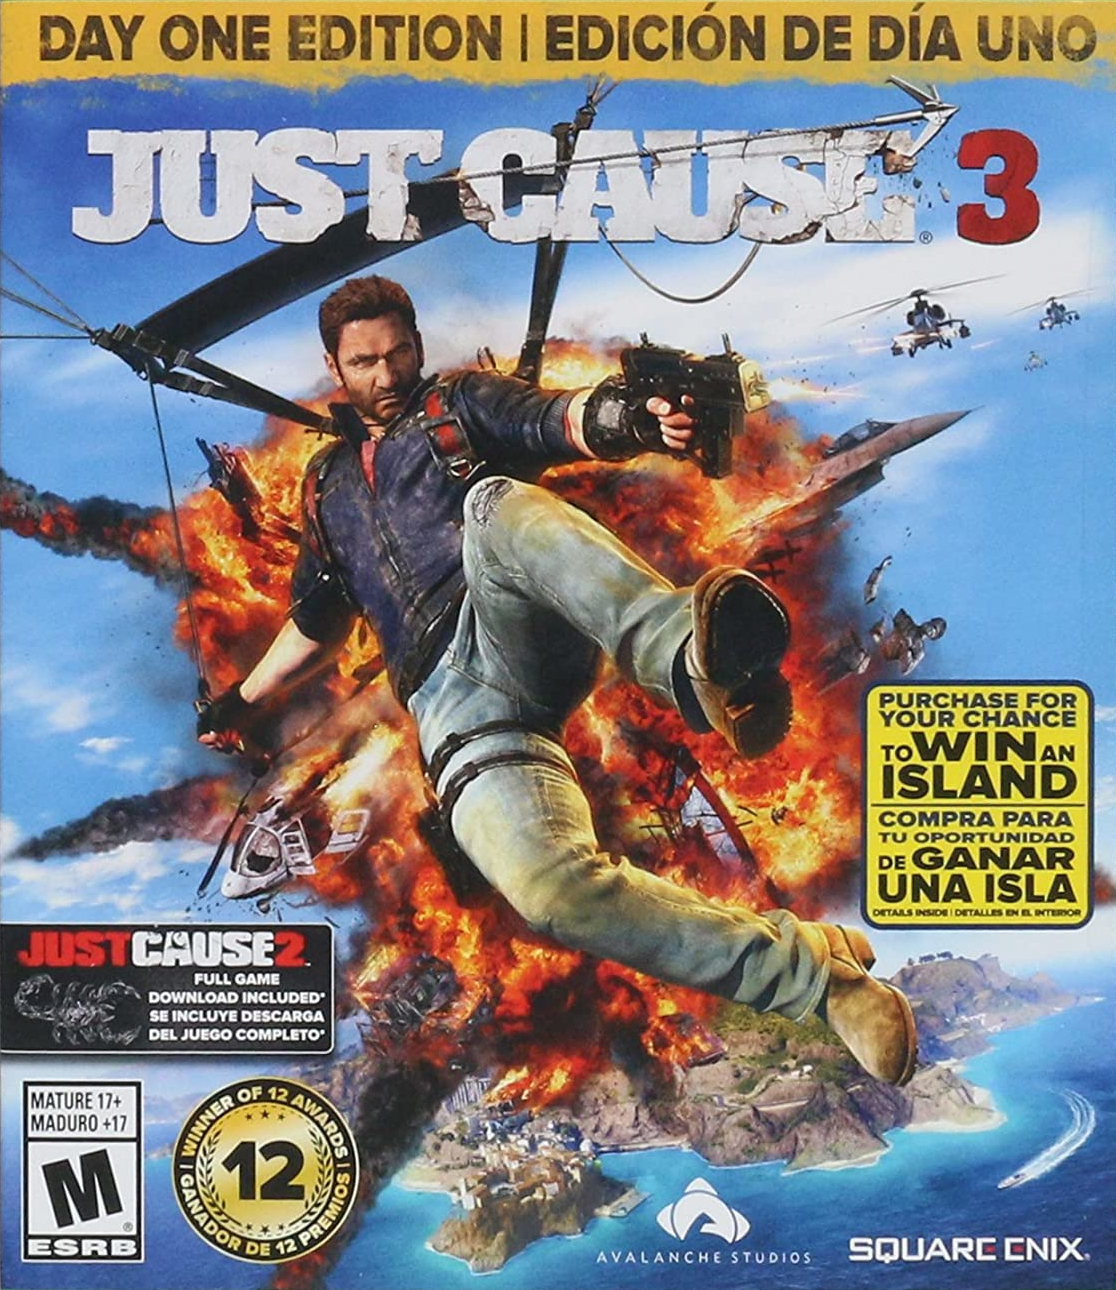 Игра just one. Just cause 2 [ps3]. Just cause 1 ps4. Just cause 5 ps4. Just cause 3 Xbox.